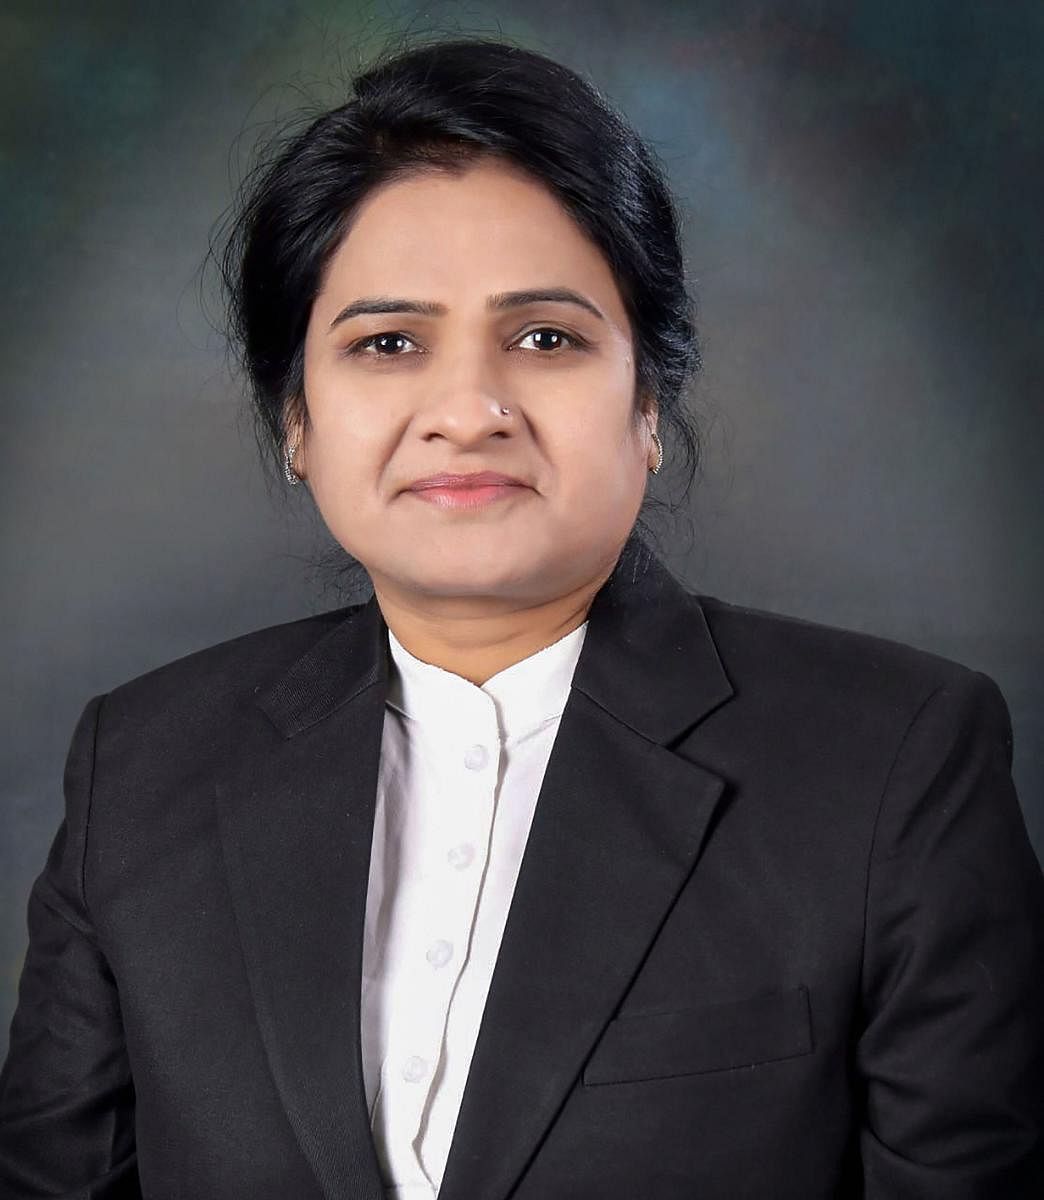 Yadav was shot dead allegedly by a fellow-advocate while she was attending an event on the Agra district court premises on June 12, 2019, two days after she was elected to the position. (PTI File Photo)